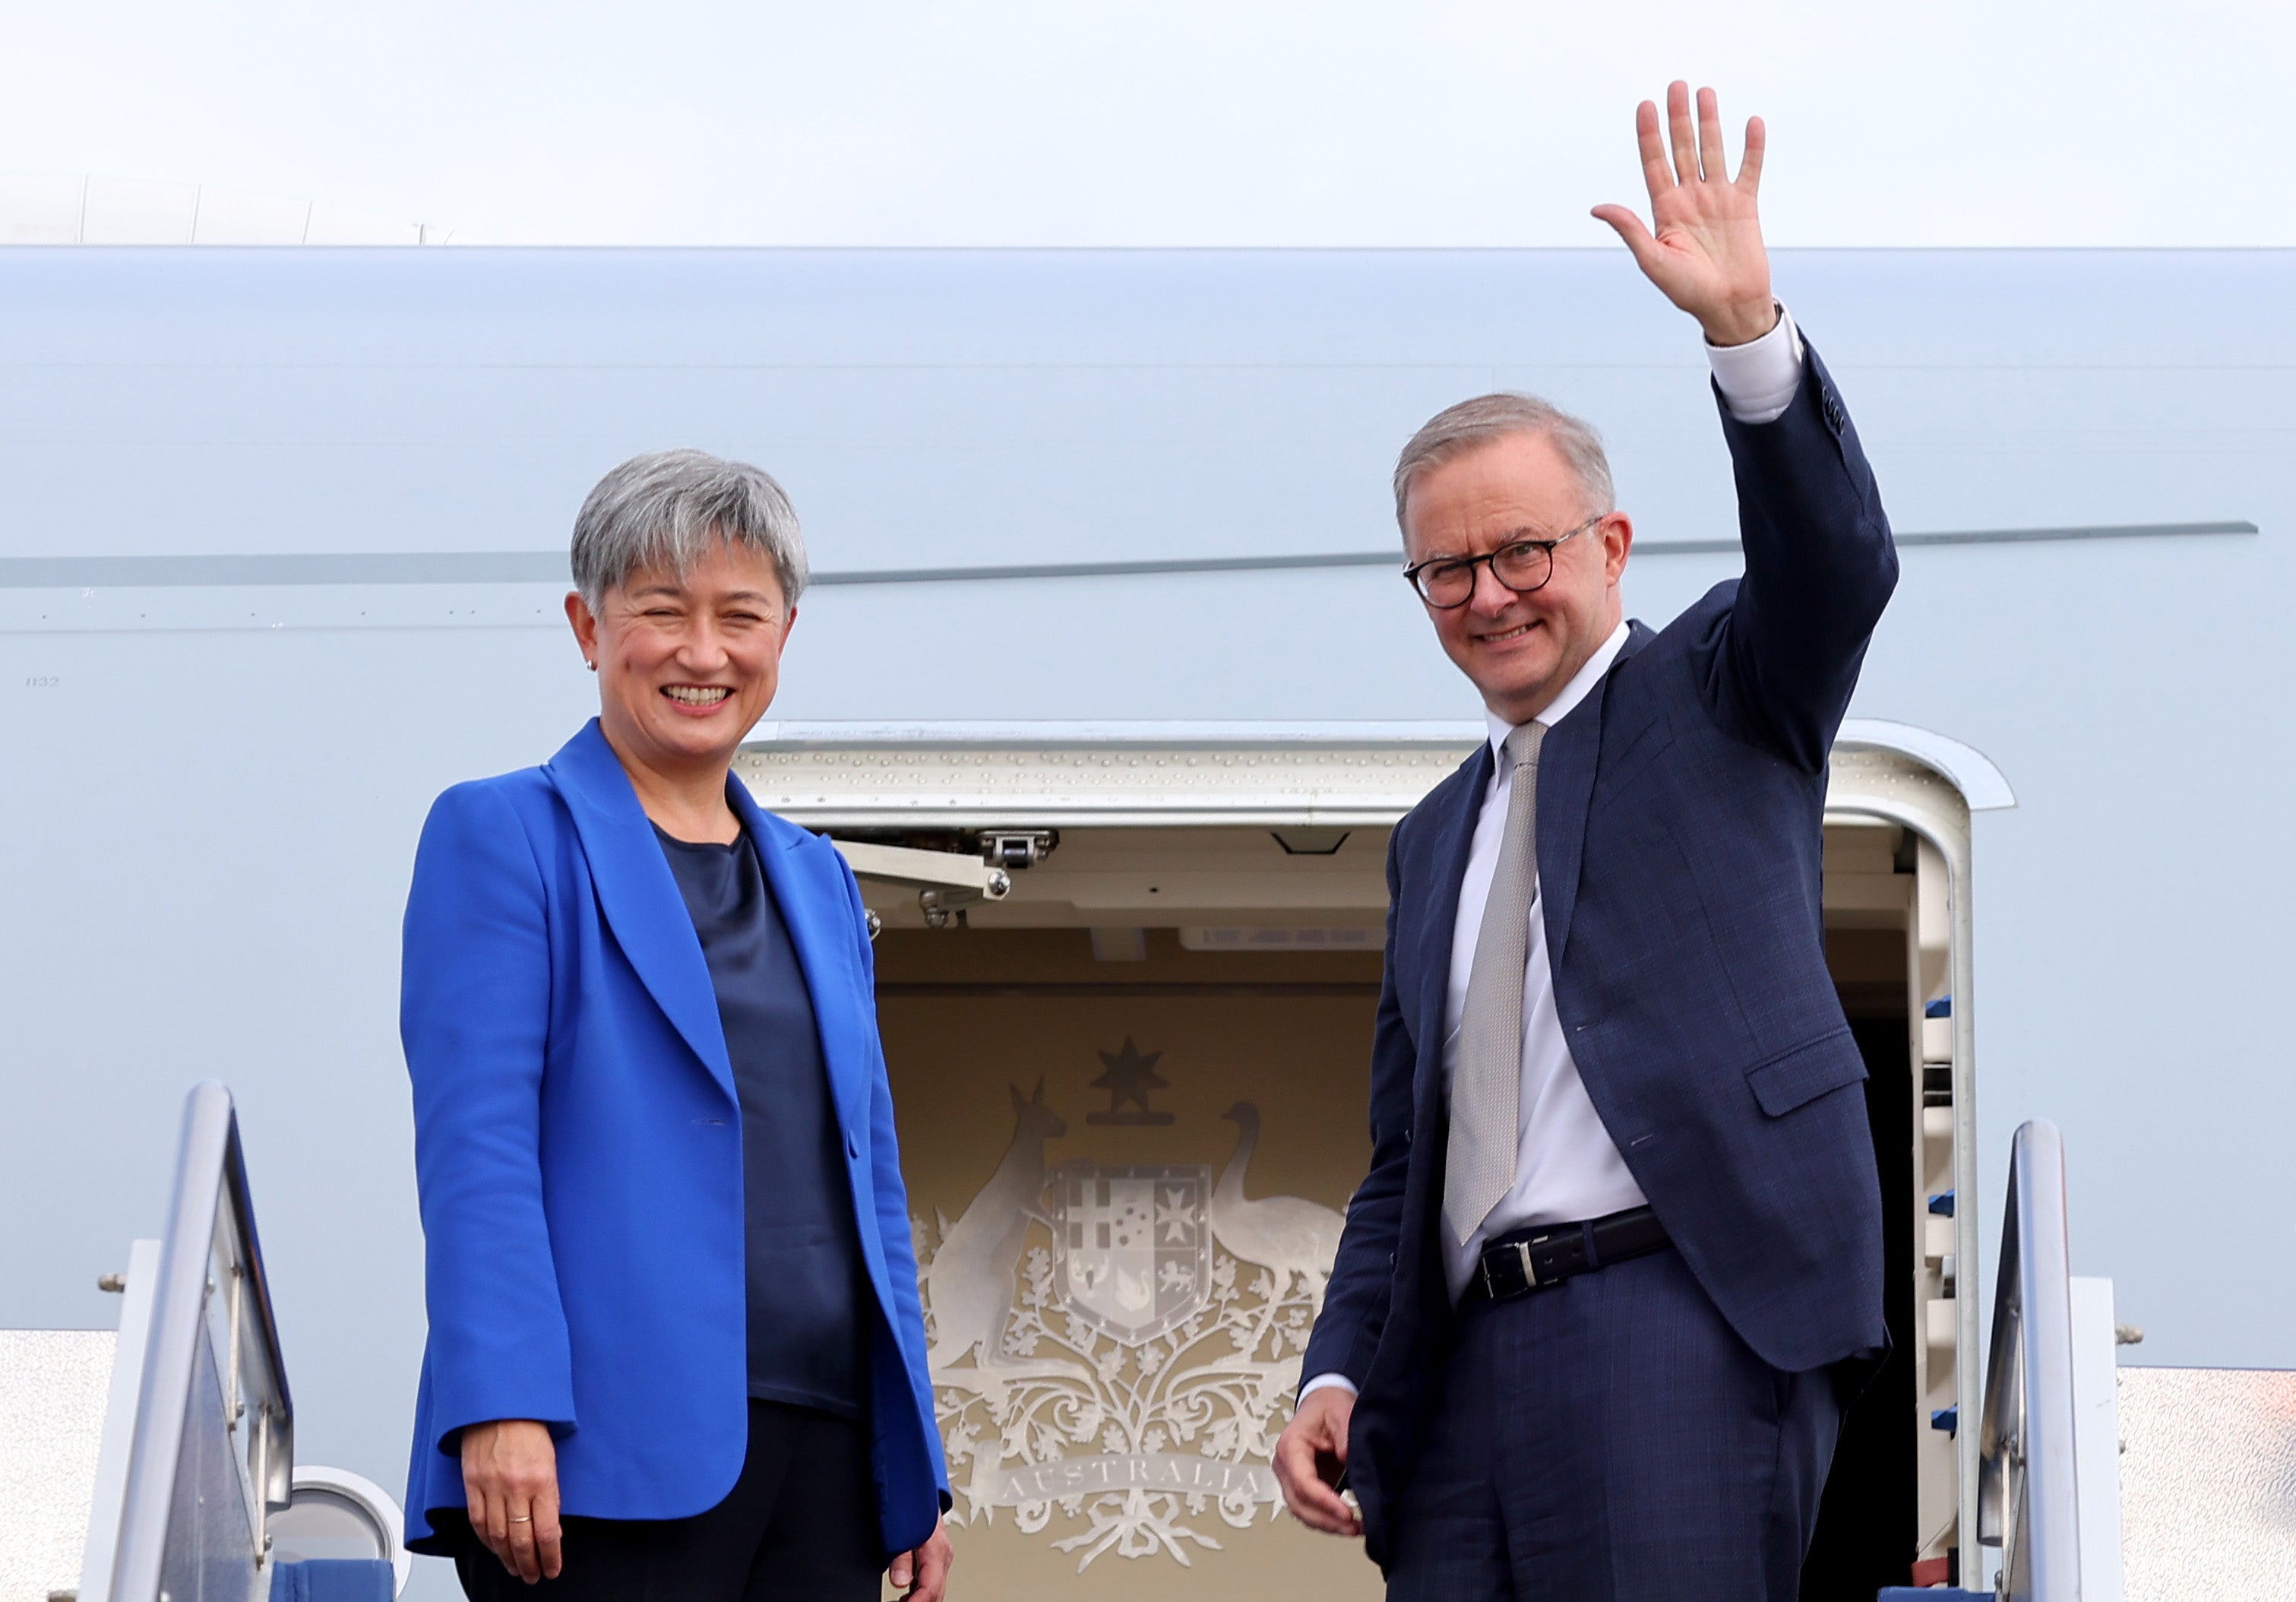 Australian Prime Minister Anthony Albanese waves alongside newly appointed Foreign Minister Penny Wong at the door of their plane